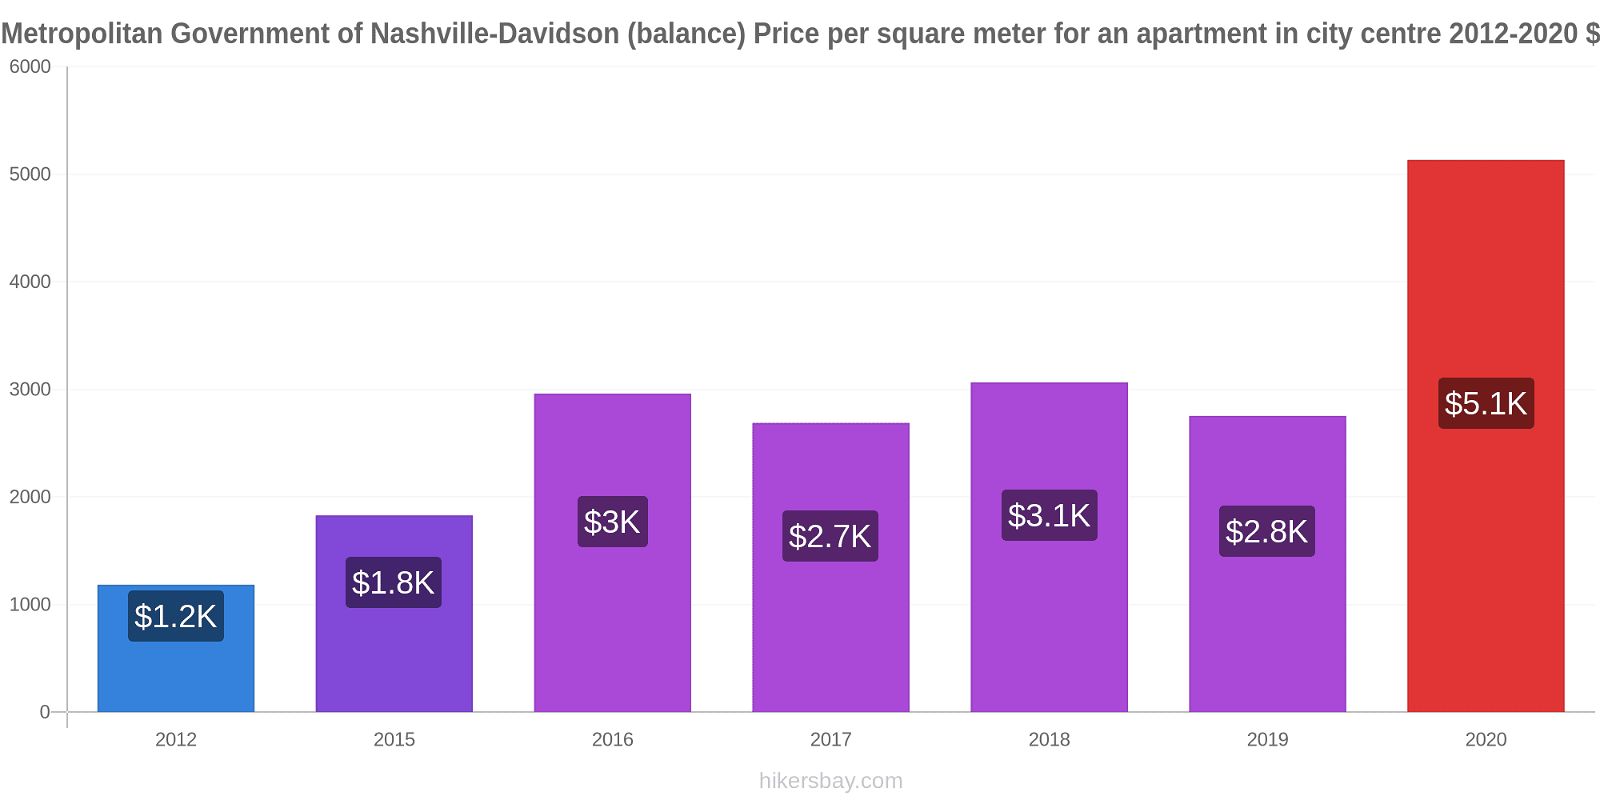 Metropolitan Government of Nashville-Davidson (balance) price changes Price per square meter for an apartment in city centre hikersbay.com